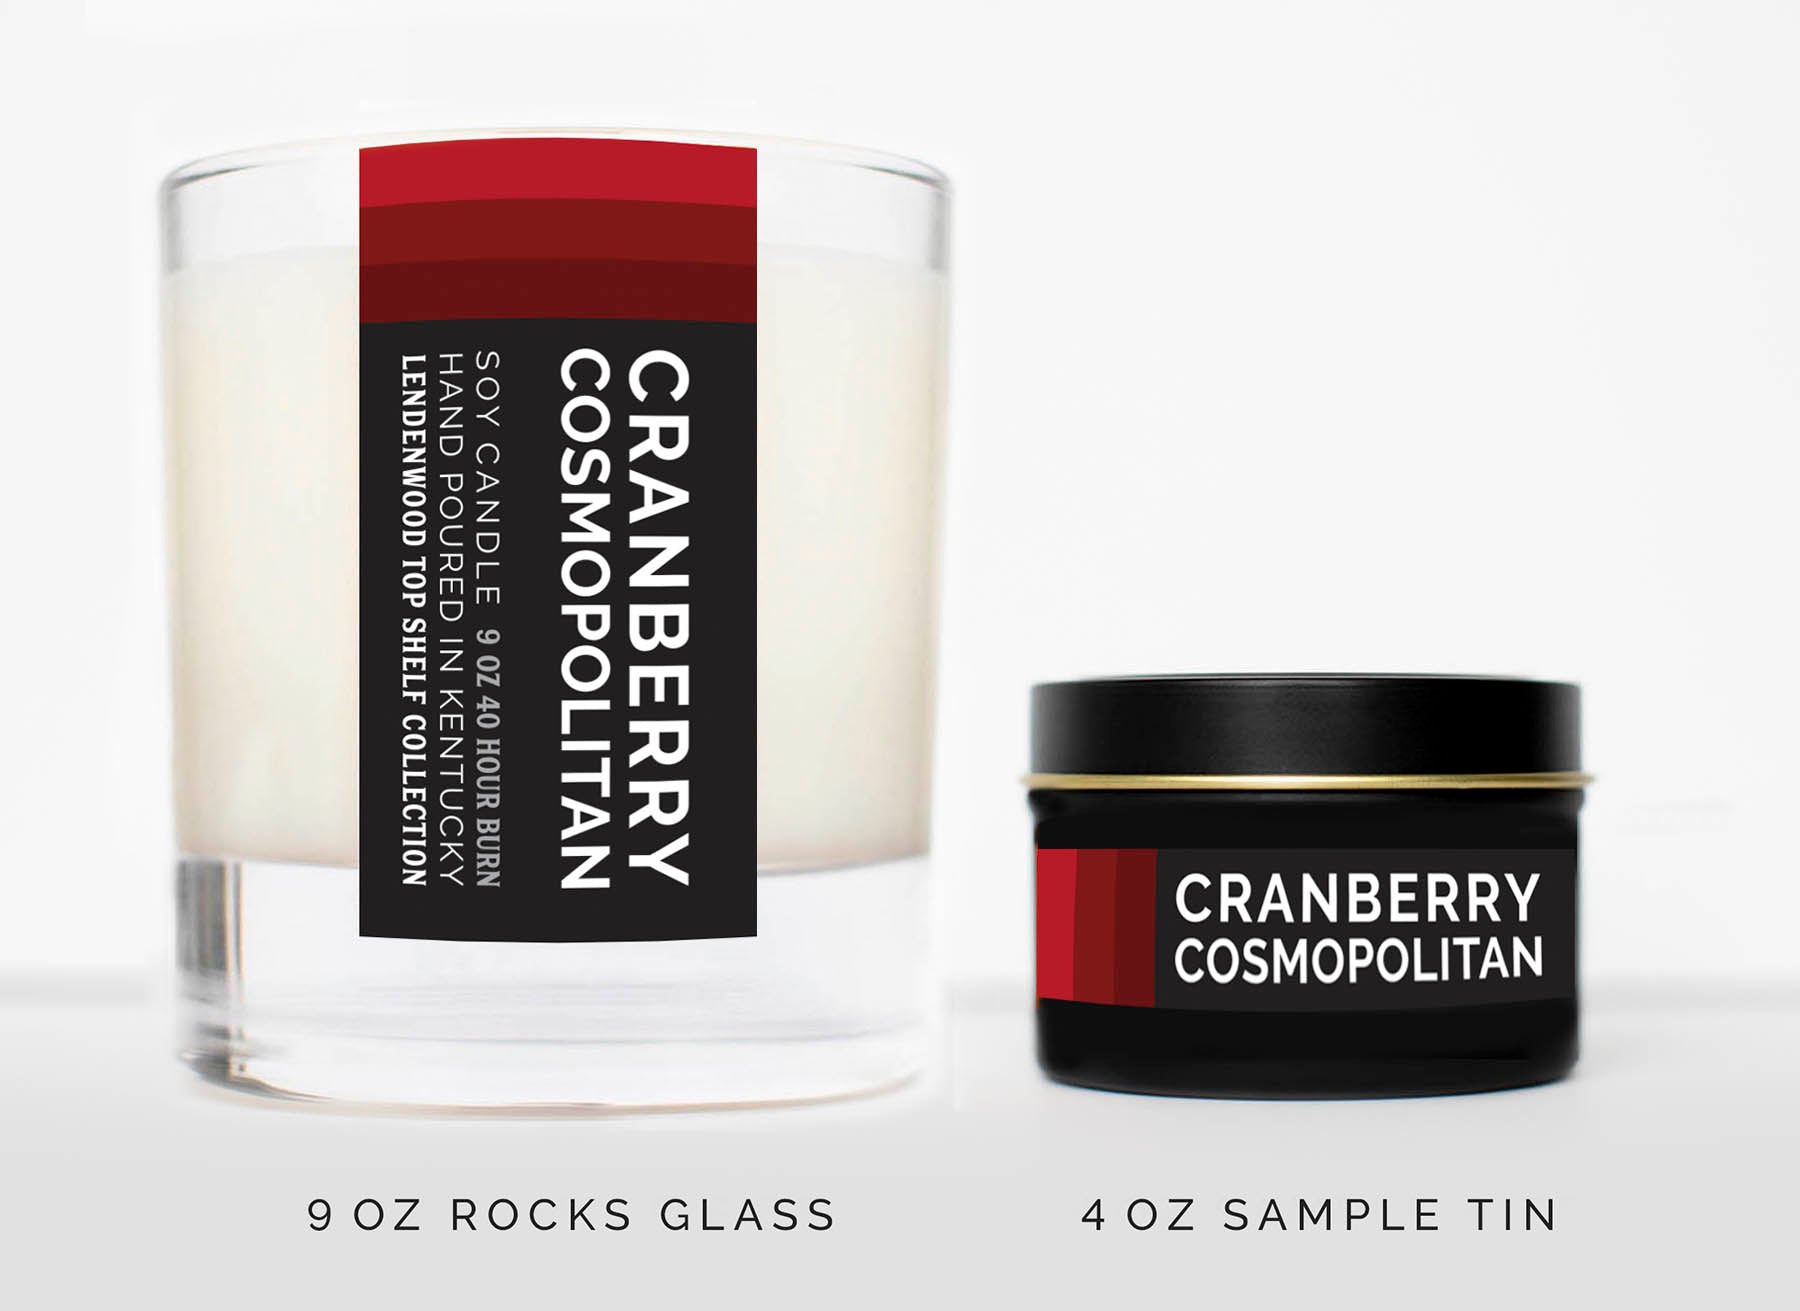 Cranberry Cosmopolitan Scented Soy Candle